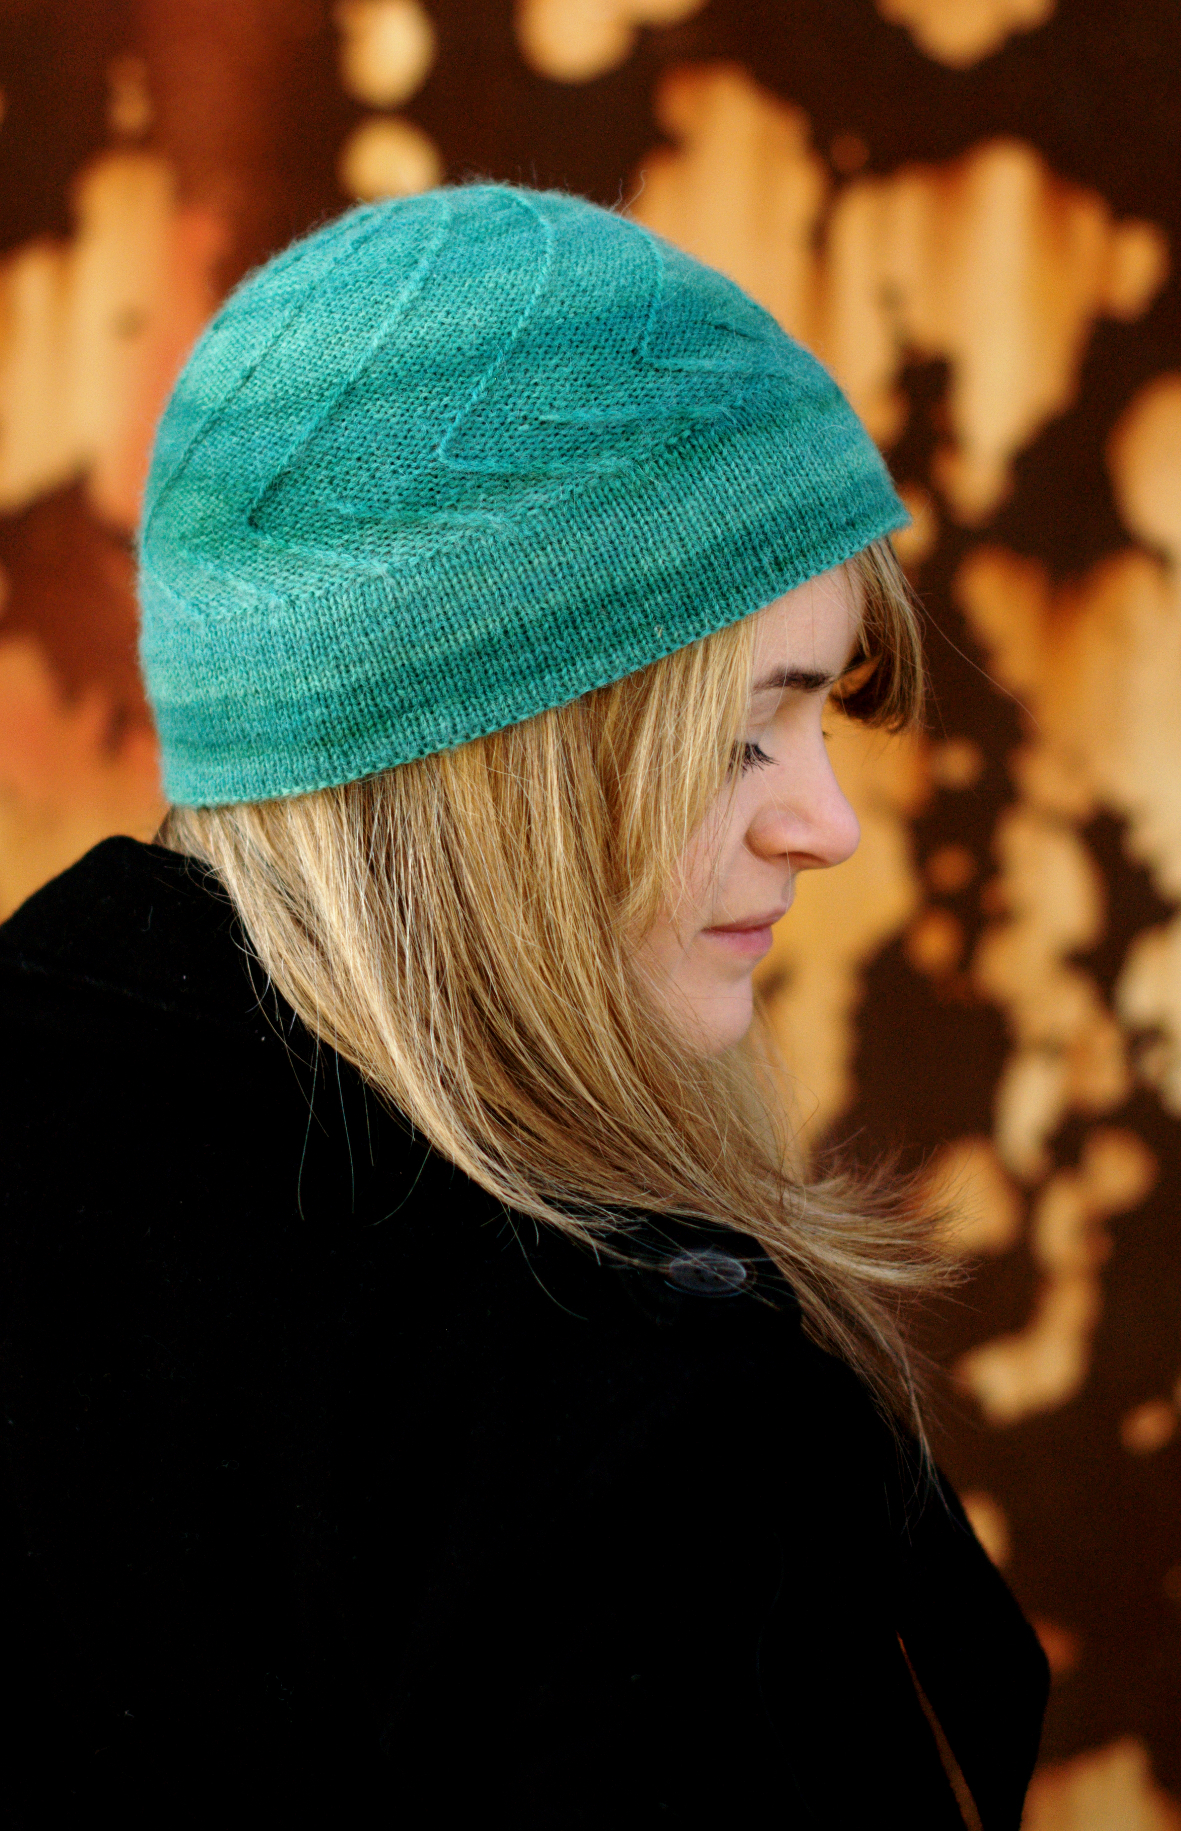 Out of the Darkness beanie and beret knitting pattern